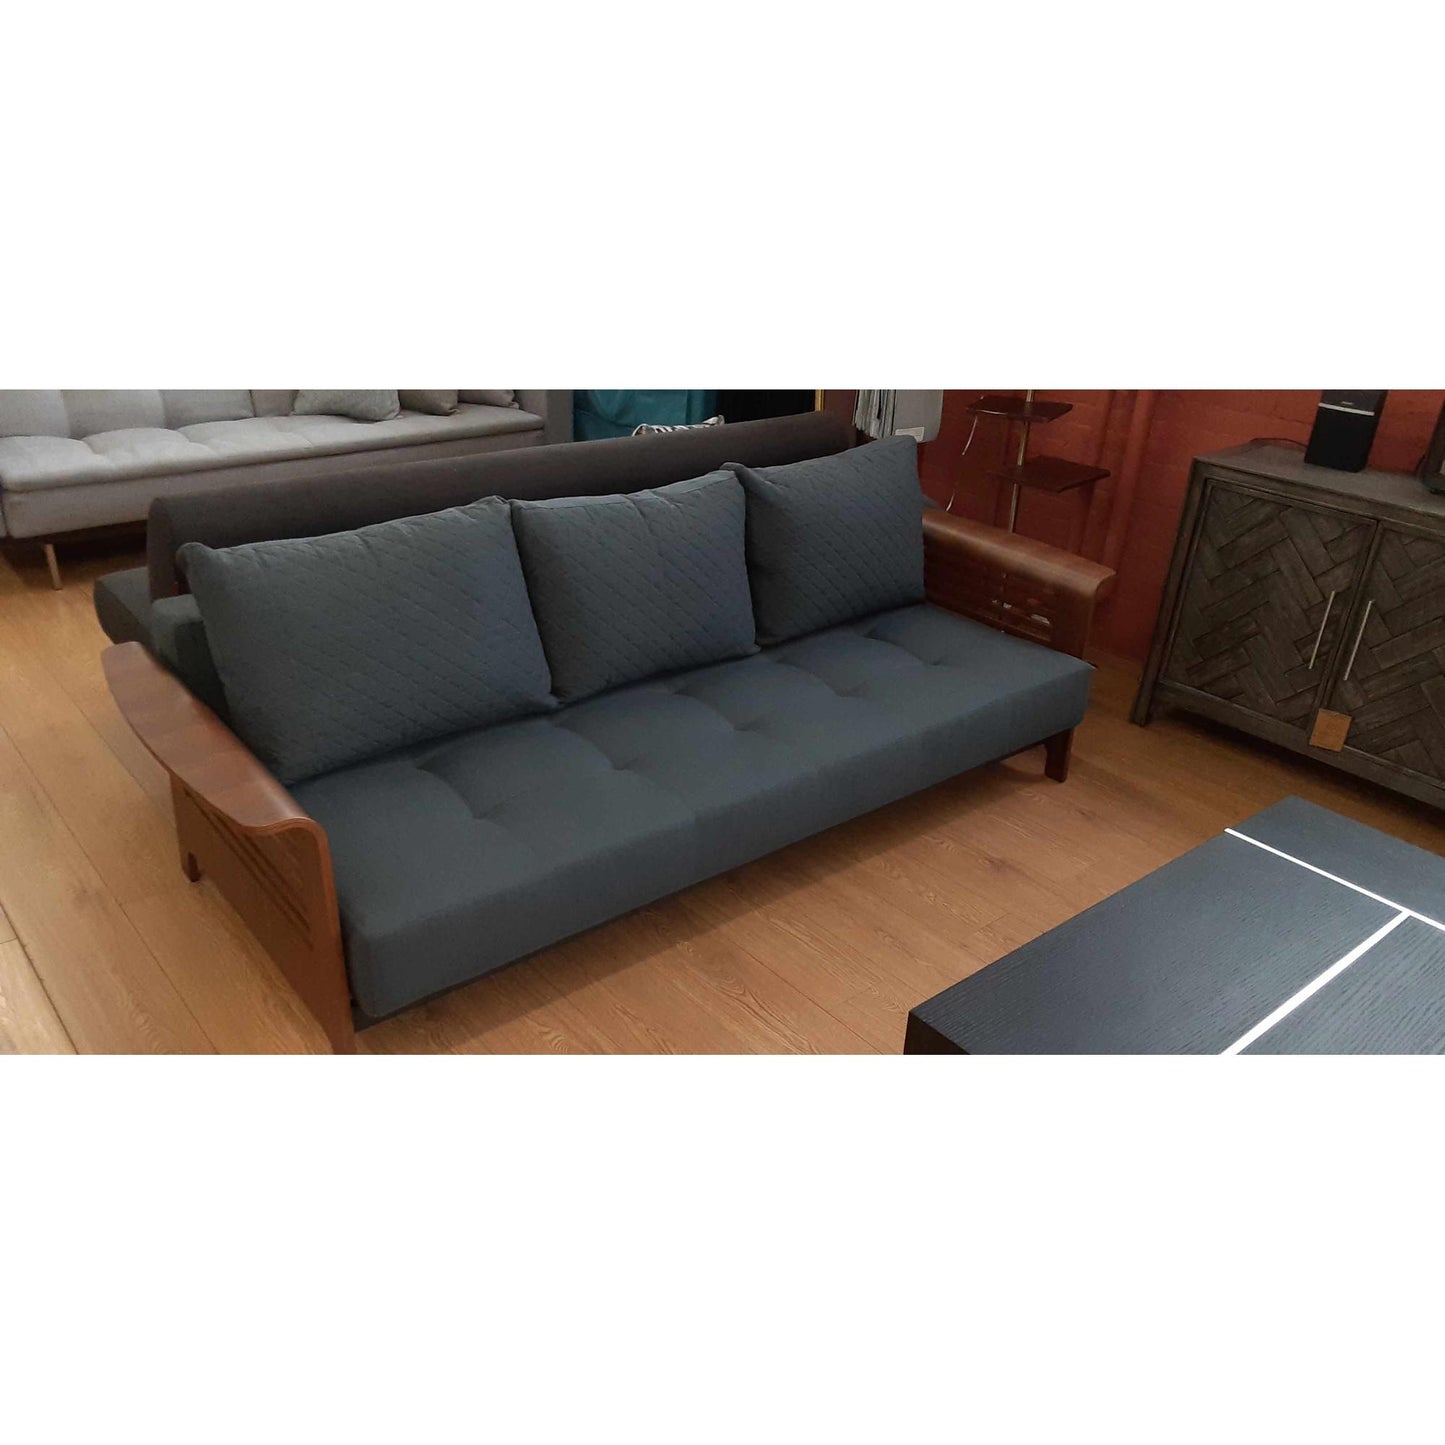 Brutus Sofa Bed in Elegance Anthracite Gray